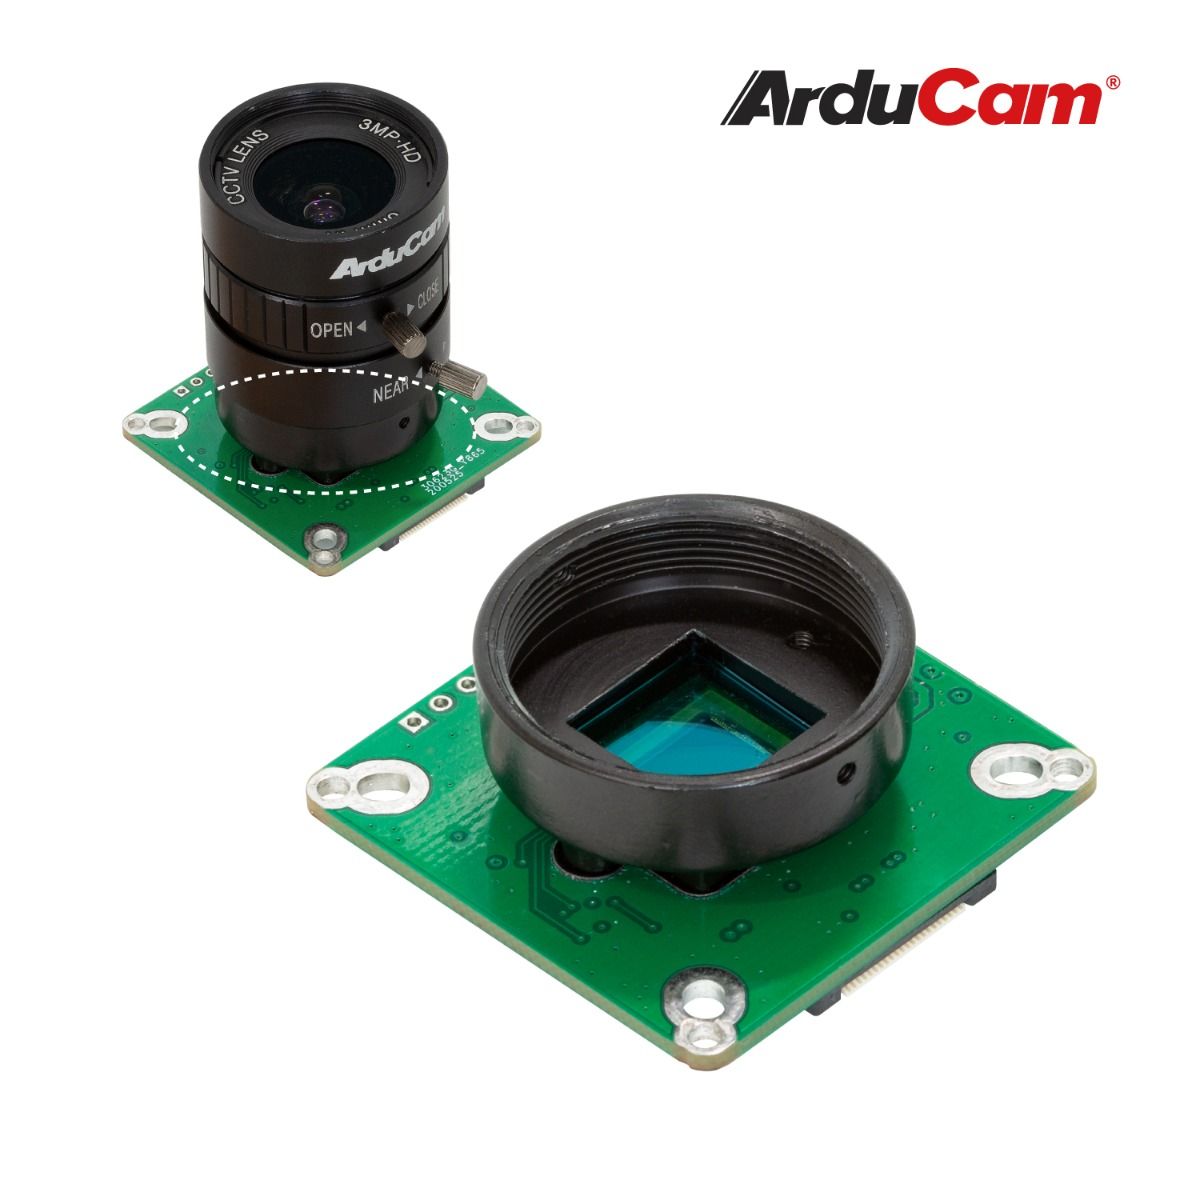 Arducam High Quality Camera for Raspberry Pi, 12.3MP 1/2.3 Inch IMX477 HQ Camera Module with 6mm CS Lens for Pi 4B, 3B+, 2B, 3A+, Pi Zero and more